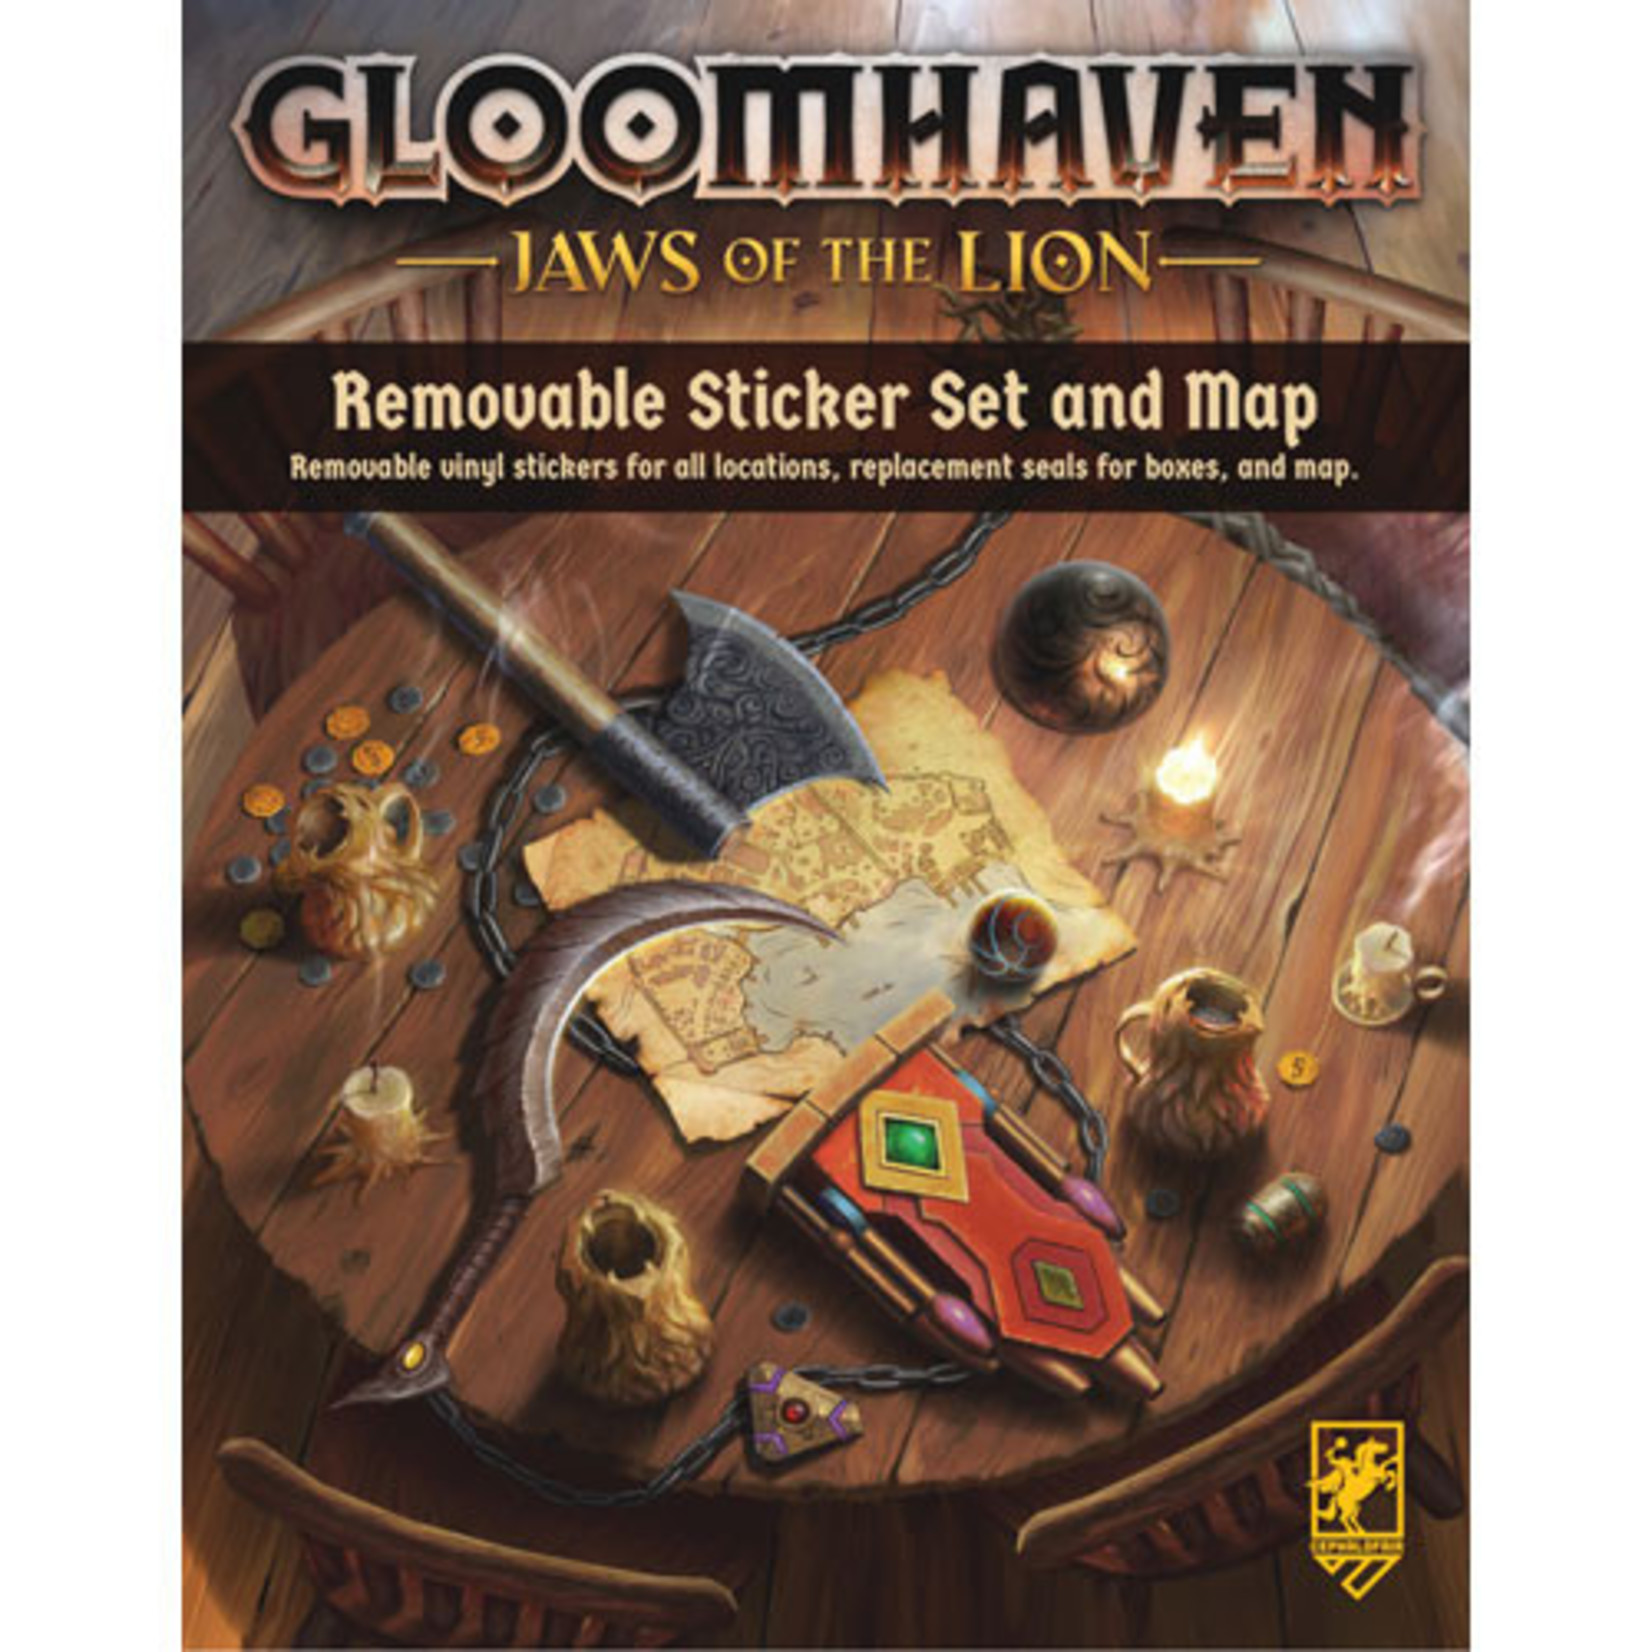 Brand New & Sealed Gloomhaven Removable Sticker Set 